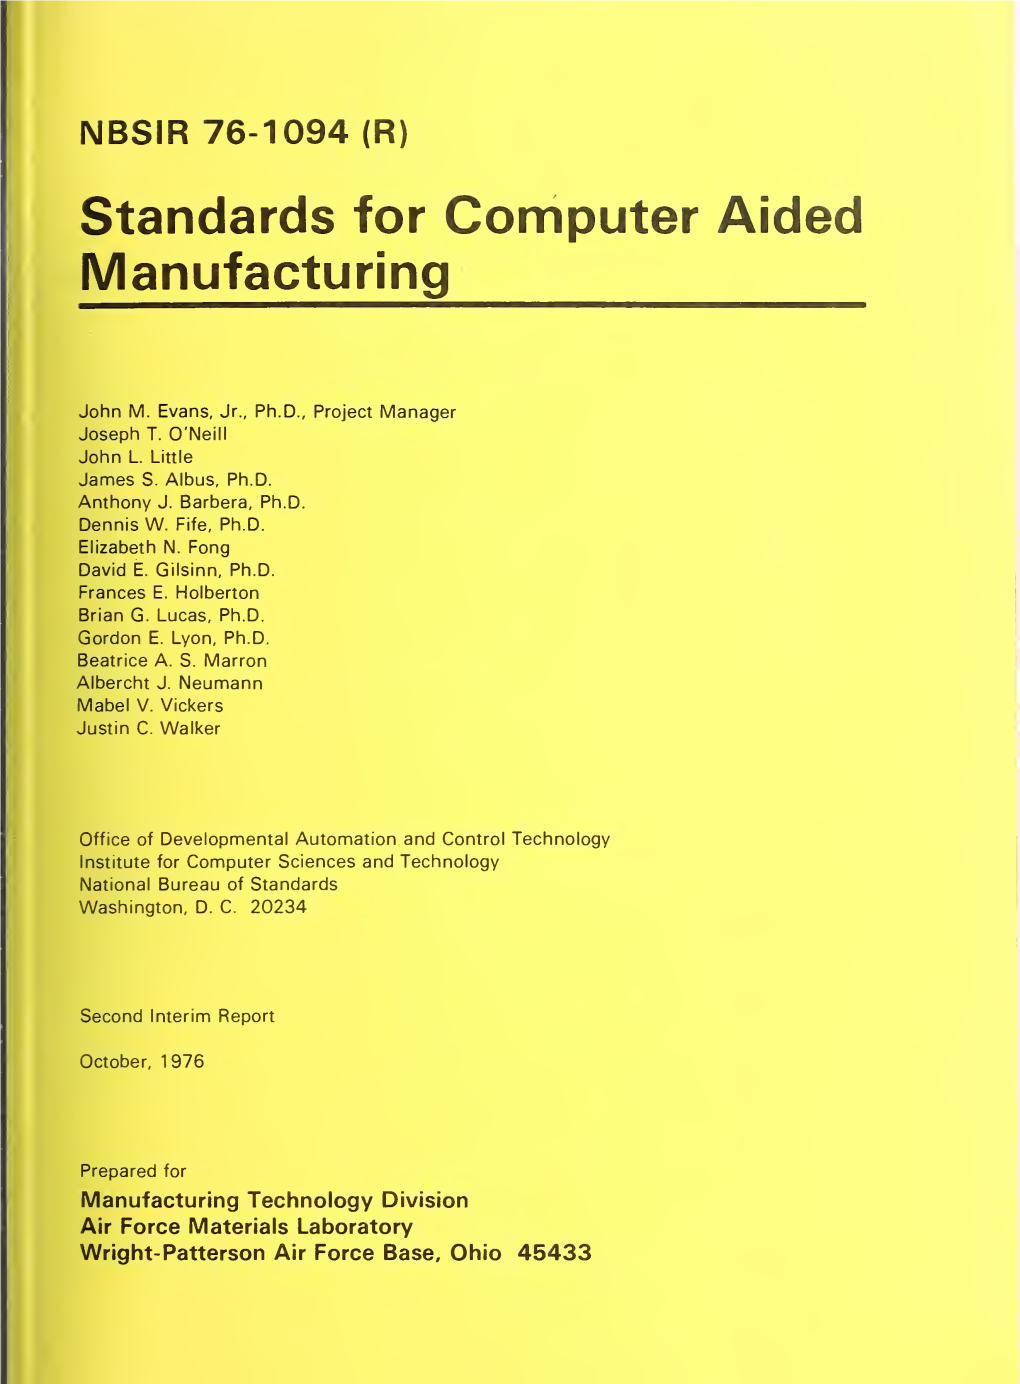 Standards for Computer Aided Manufacturing